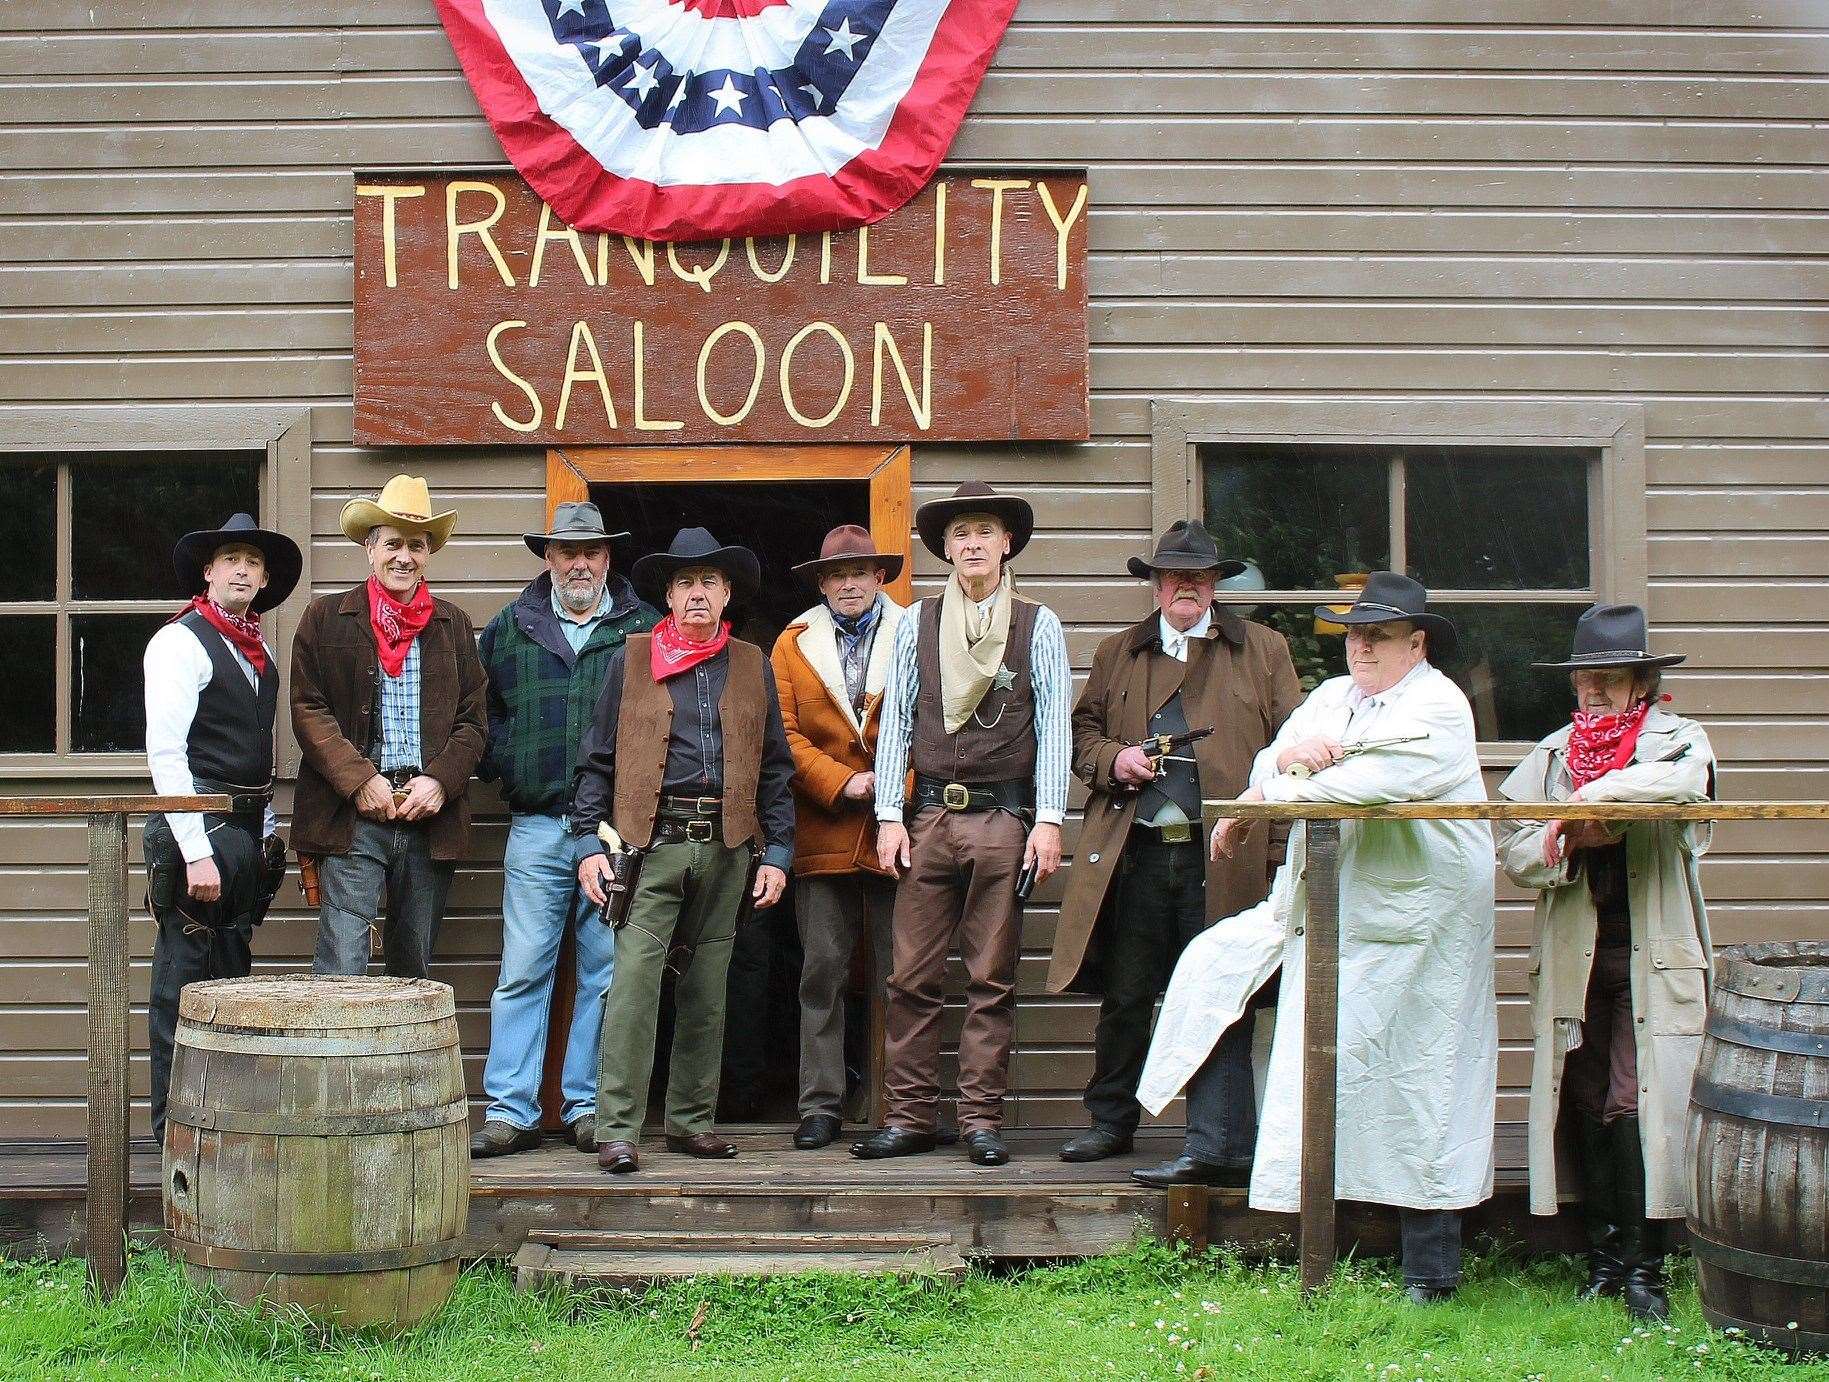 The cowboys will make a welcome return to Tranquility this month